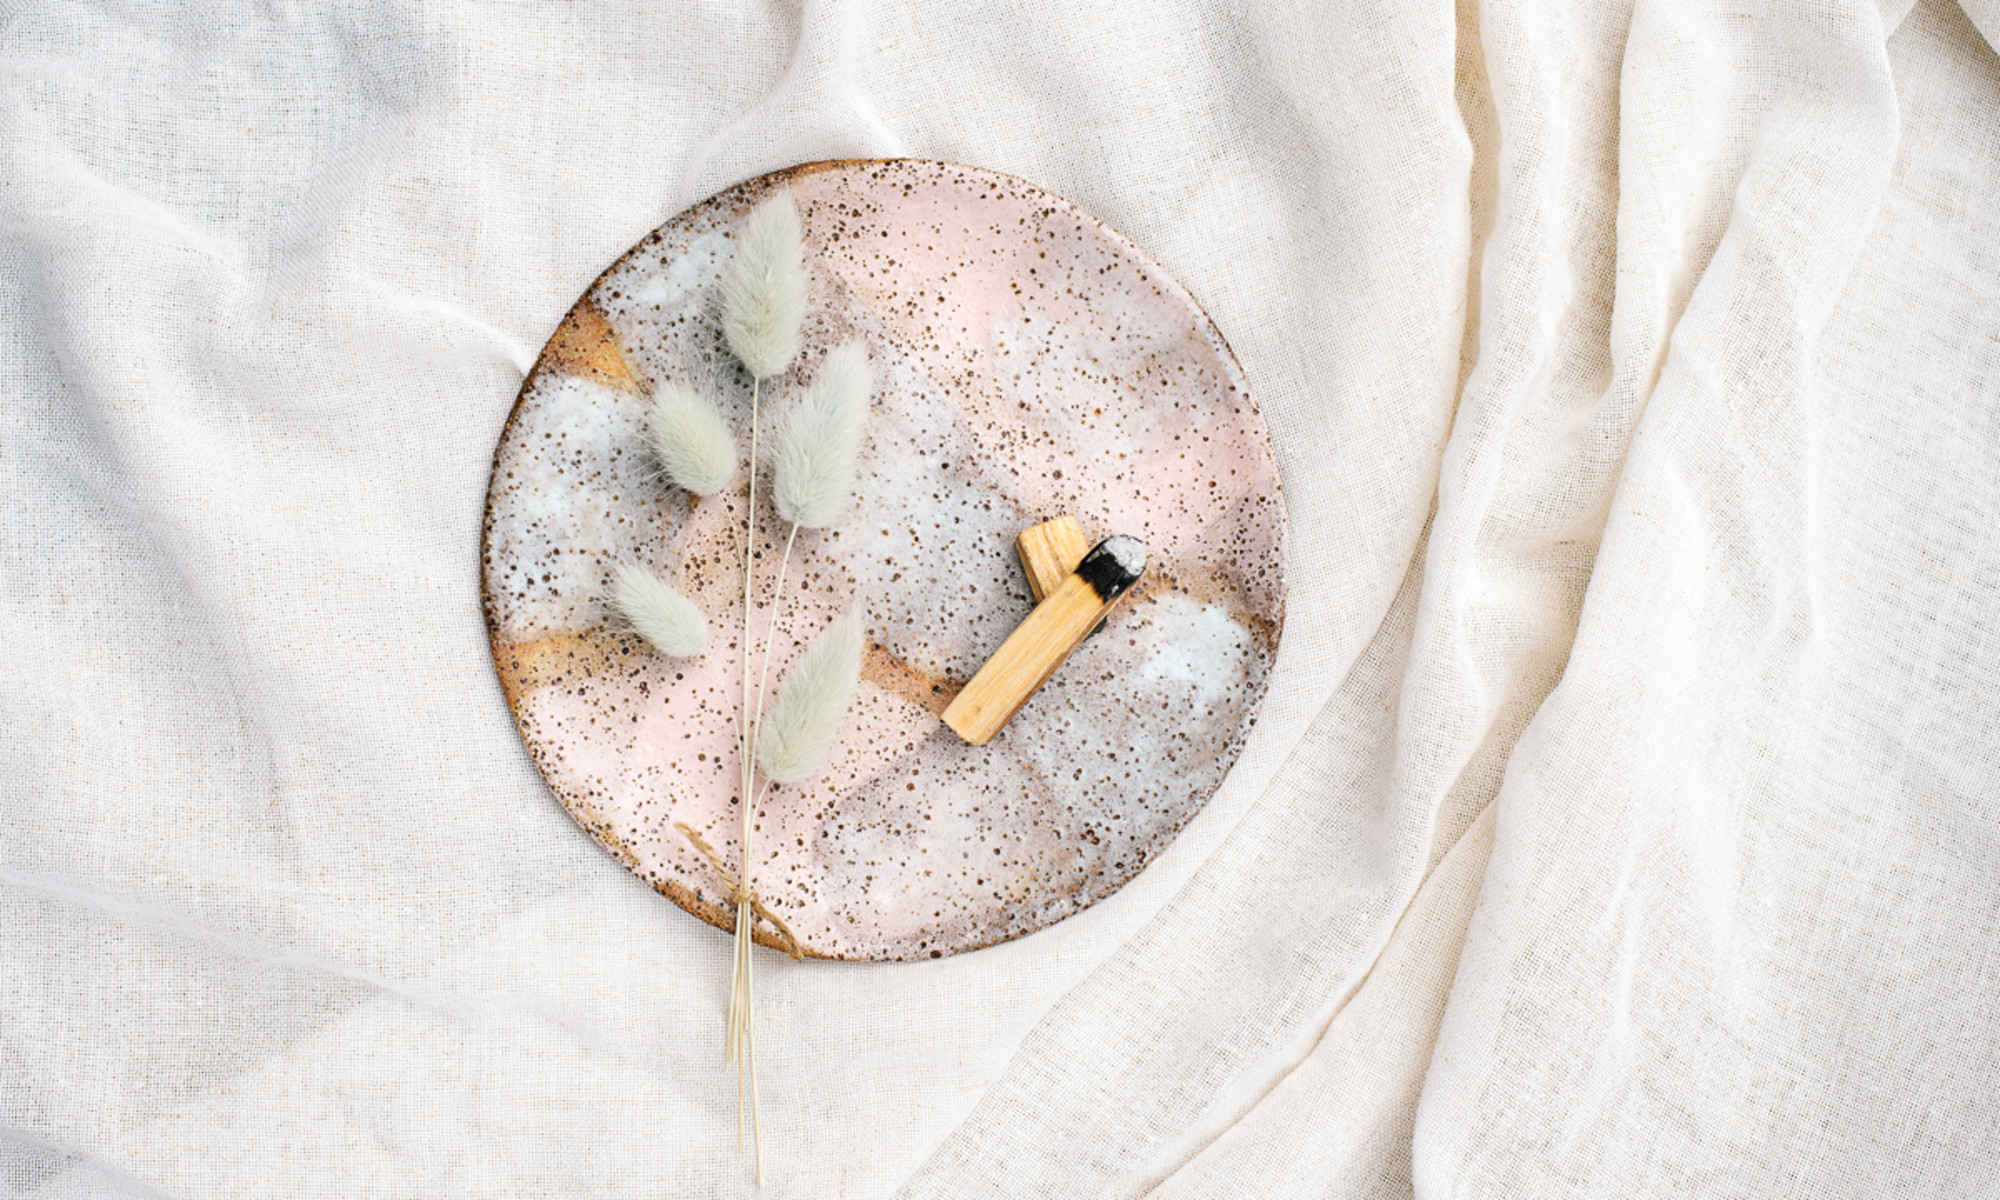 How to Use Incense: Easy Ways to Promote Well-Being